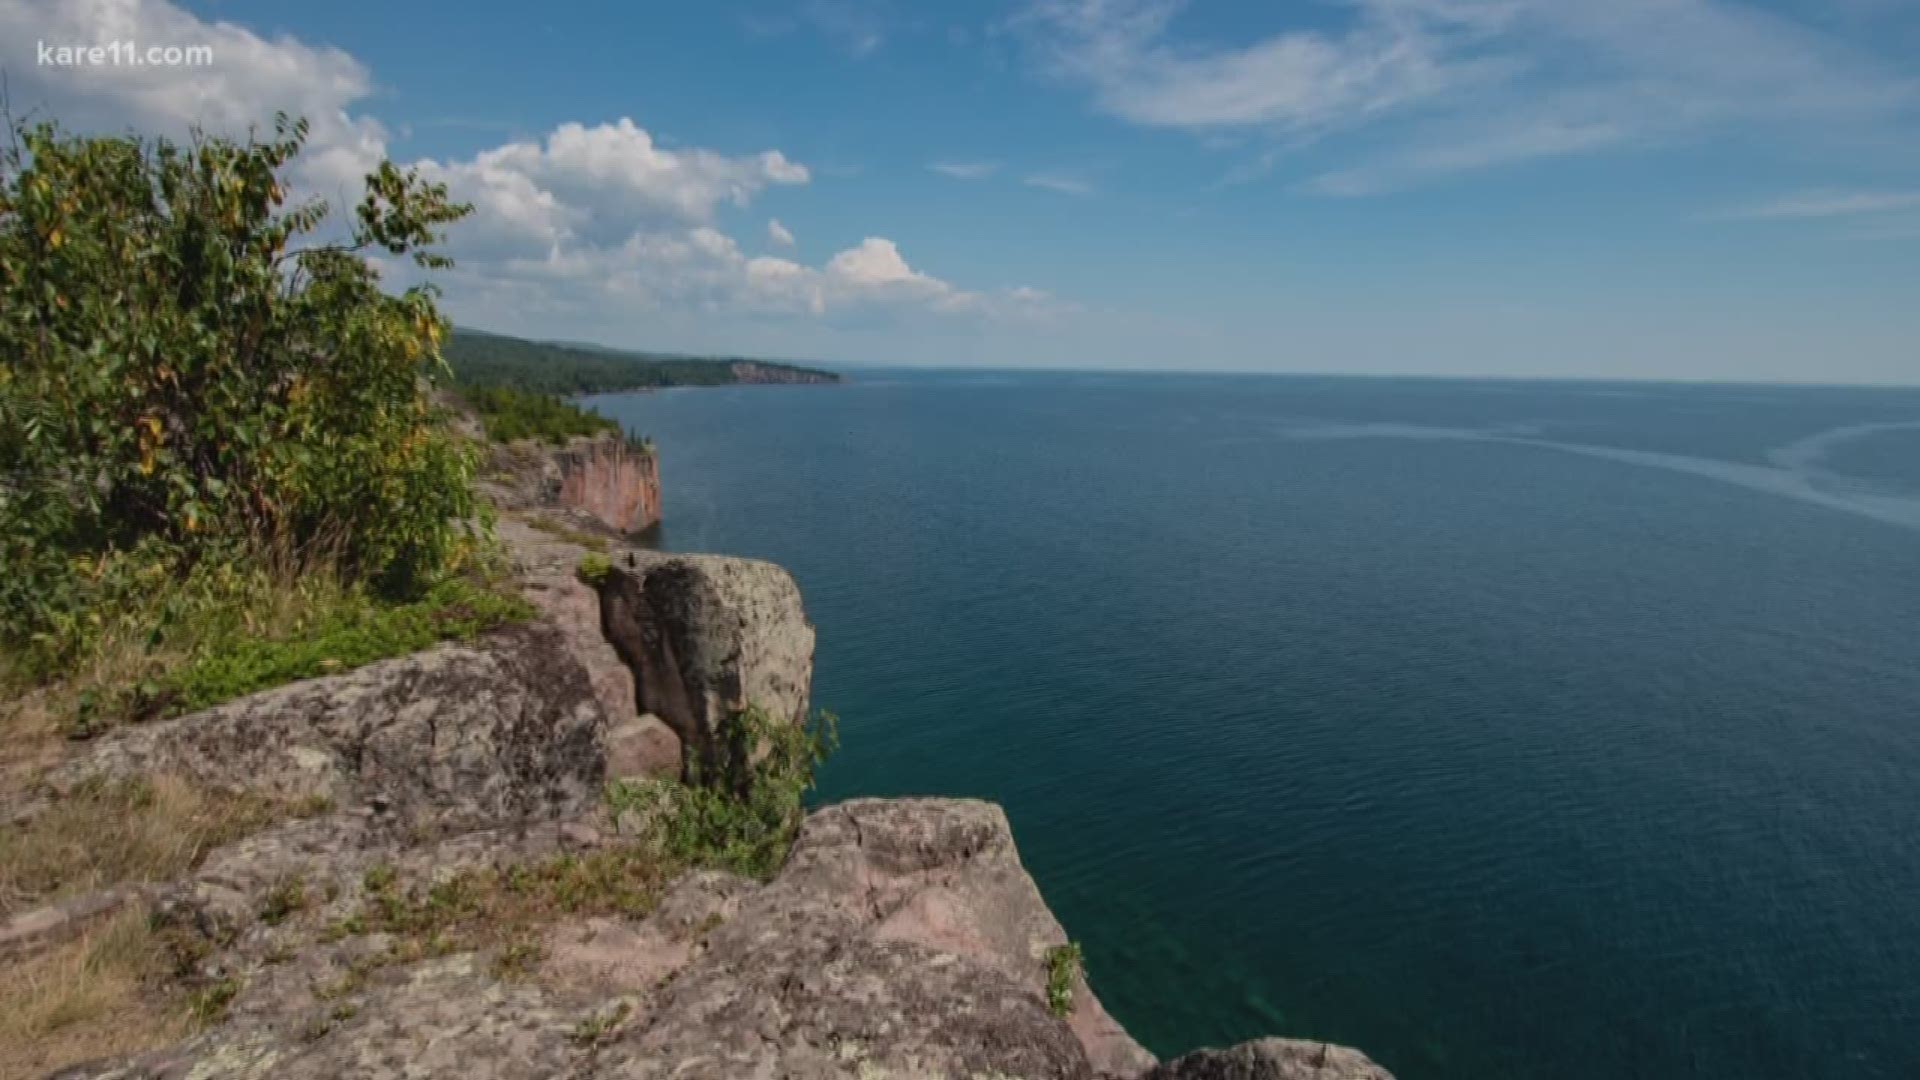 in her continuing quest to photograph the best Minnesota has to offer, KARE 11's Ellery McCardle travels to the North Shore to collect a spectacular collection of shots.